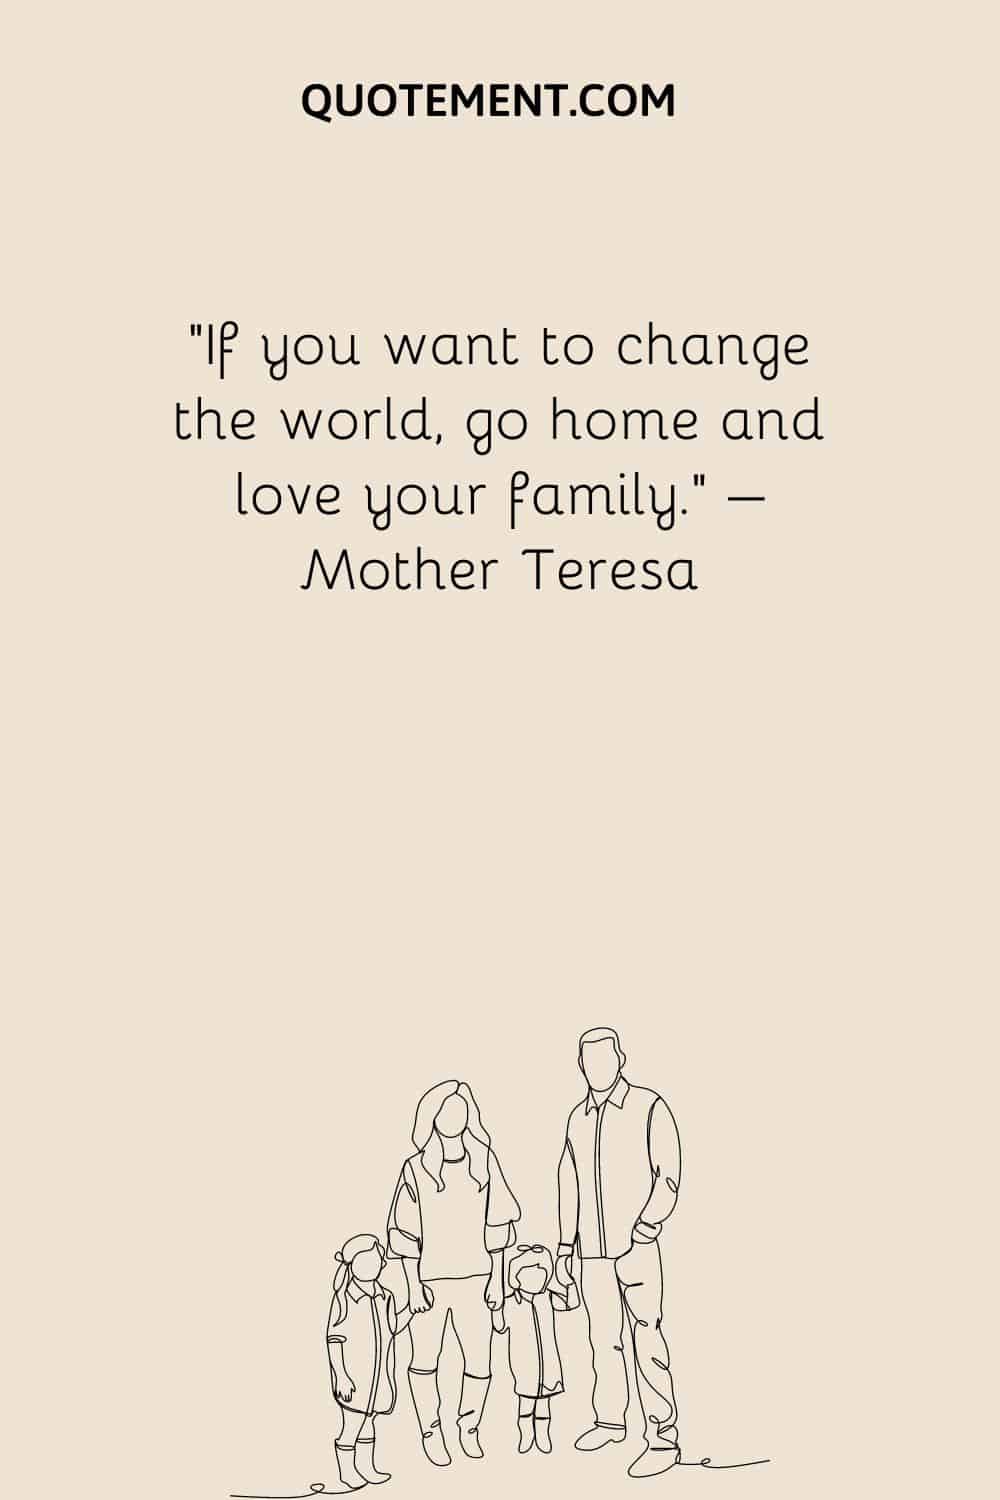 If you want to change the world, go home and love your family